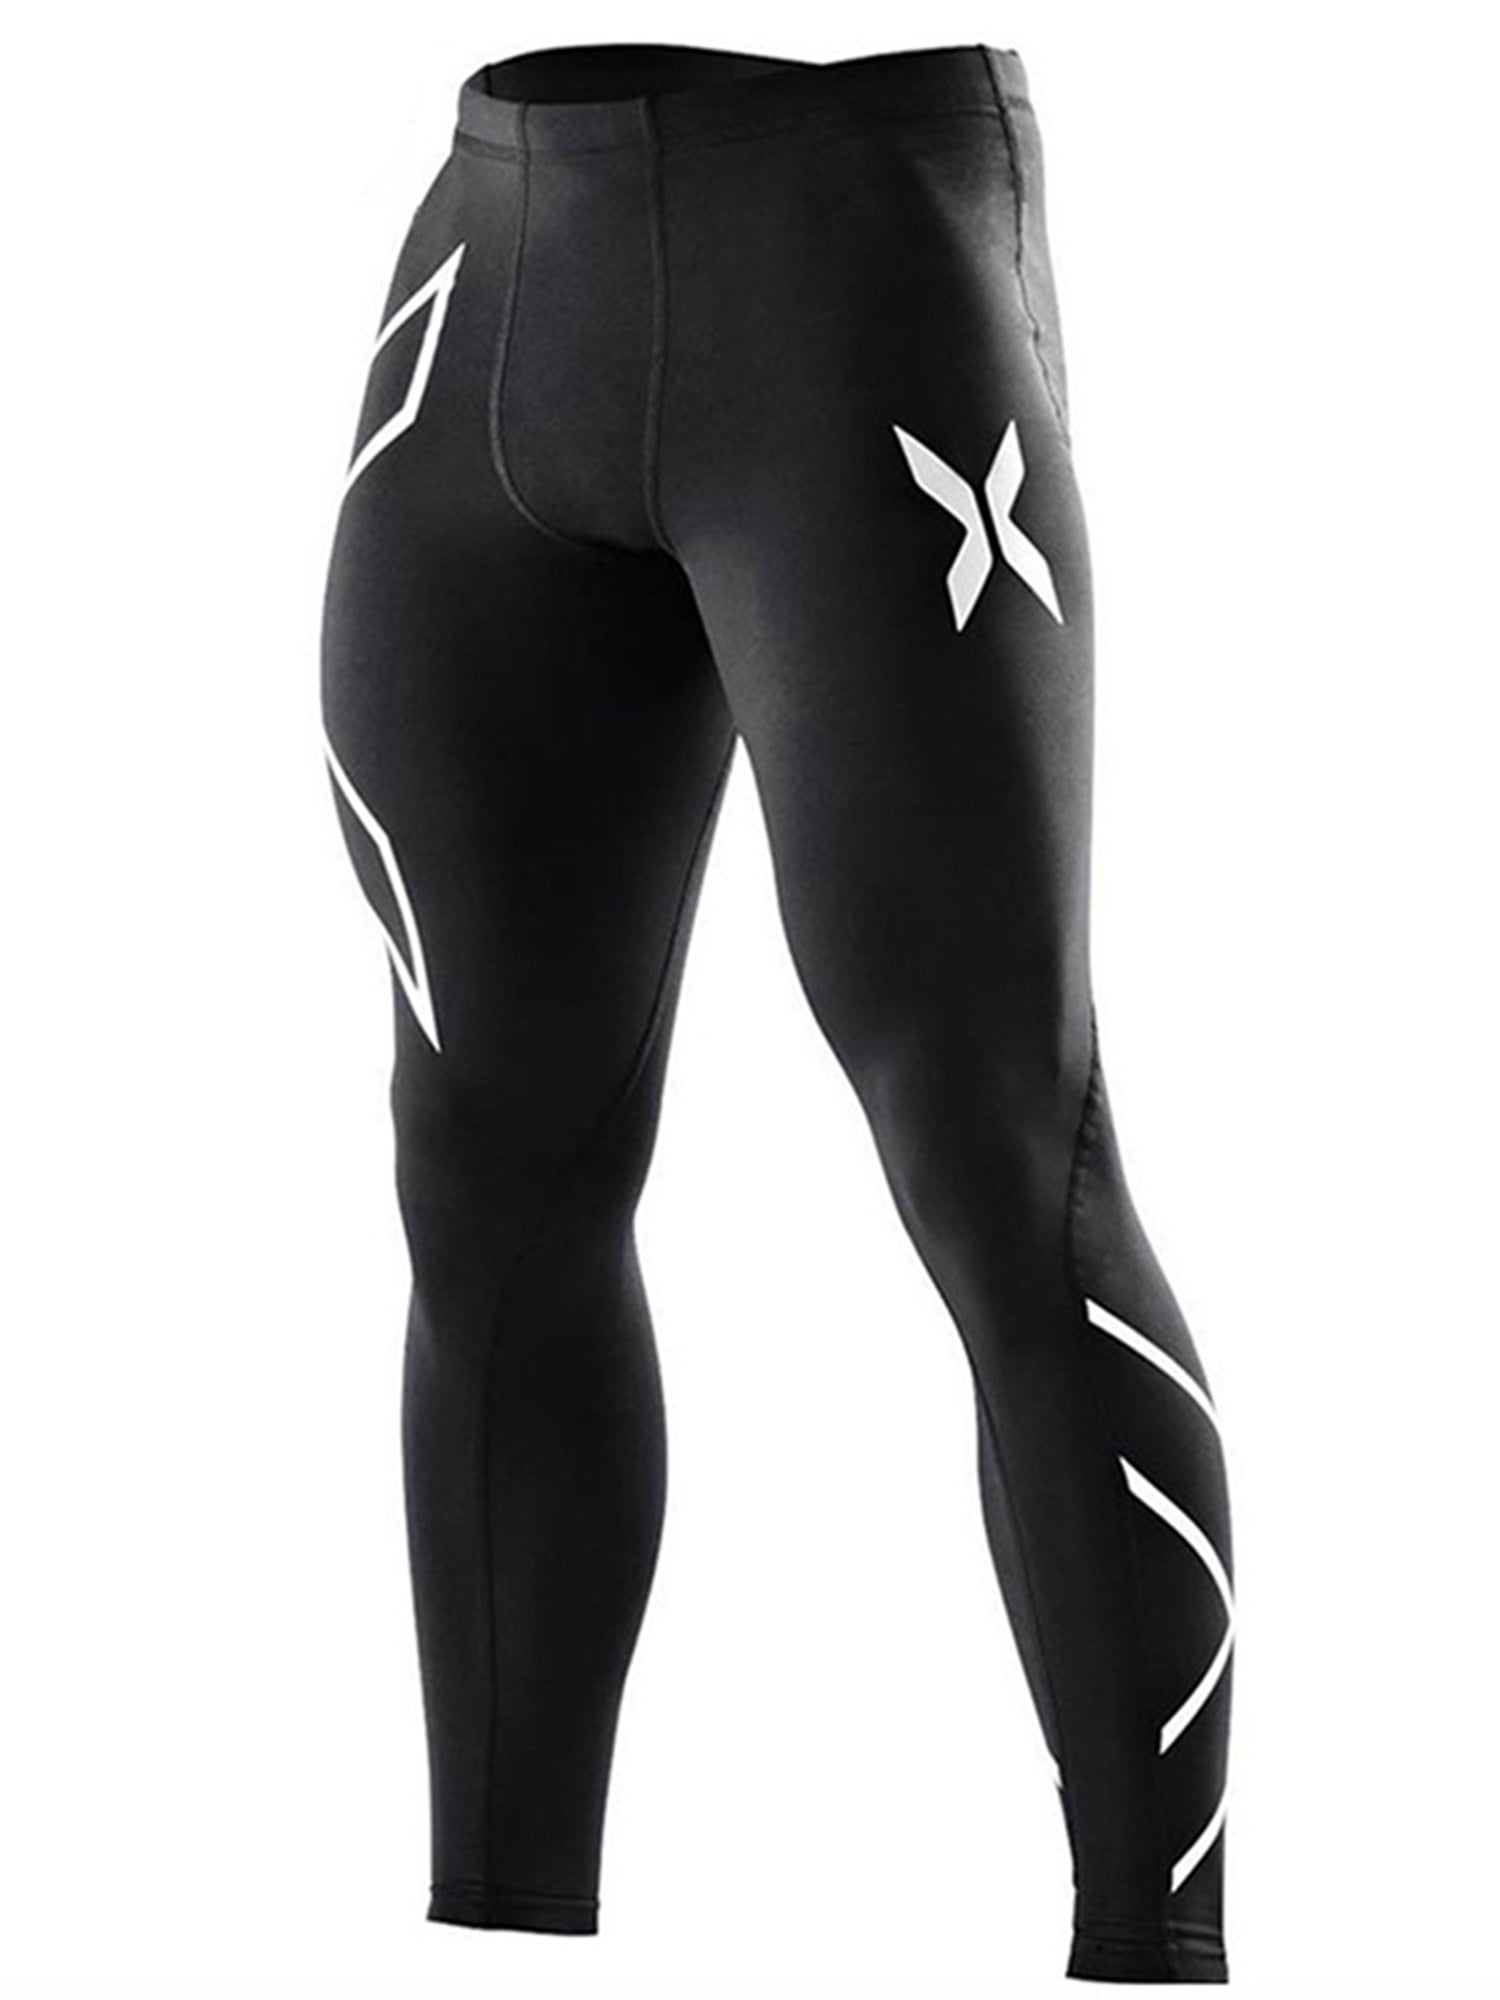 Men's Capri Compression Tight Workout Cool Dry Stretchy Running Leggings